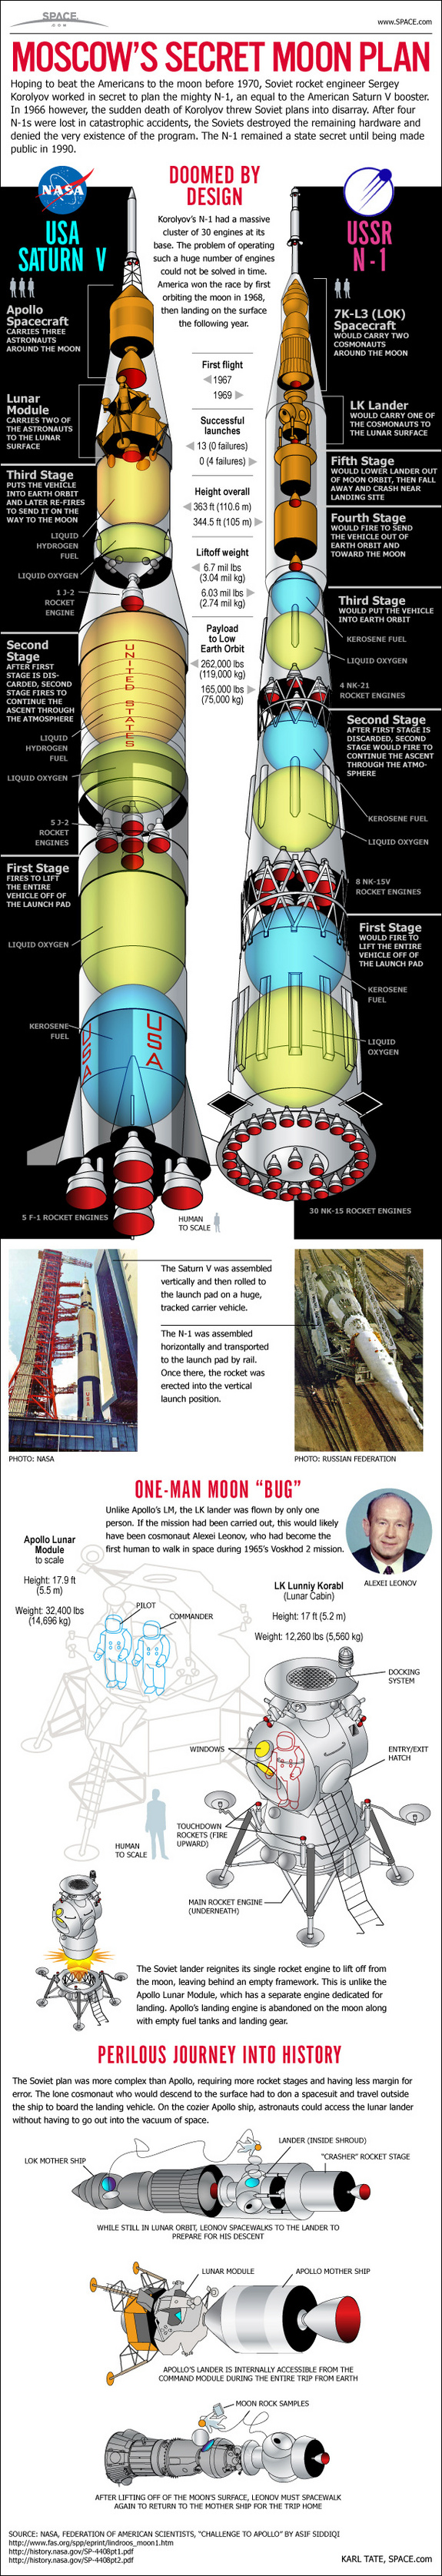 See how the former Soviet Union planned to match the U.S. Apollo moon landings with the N-1 rocket in this infographic.